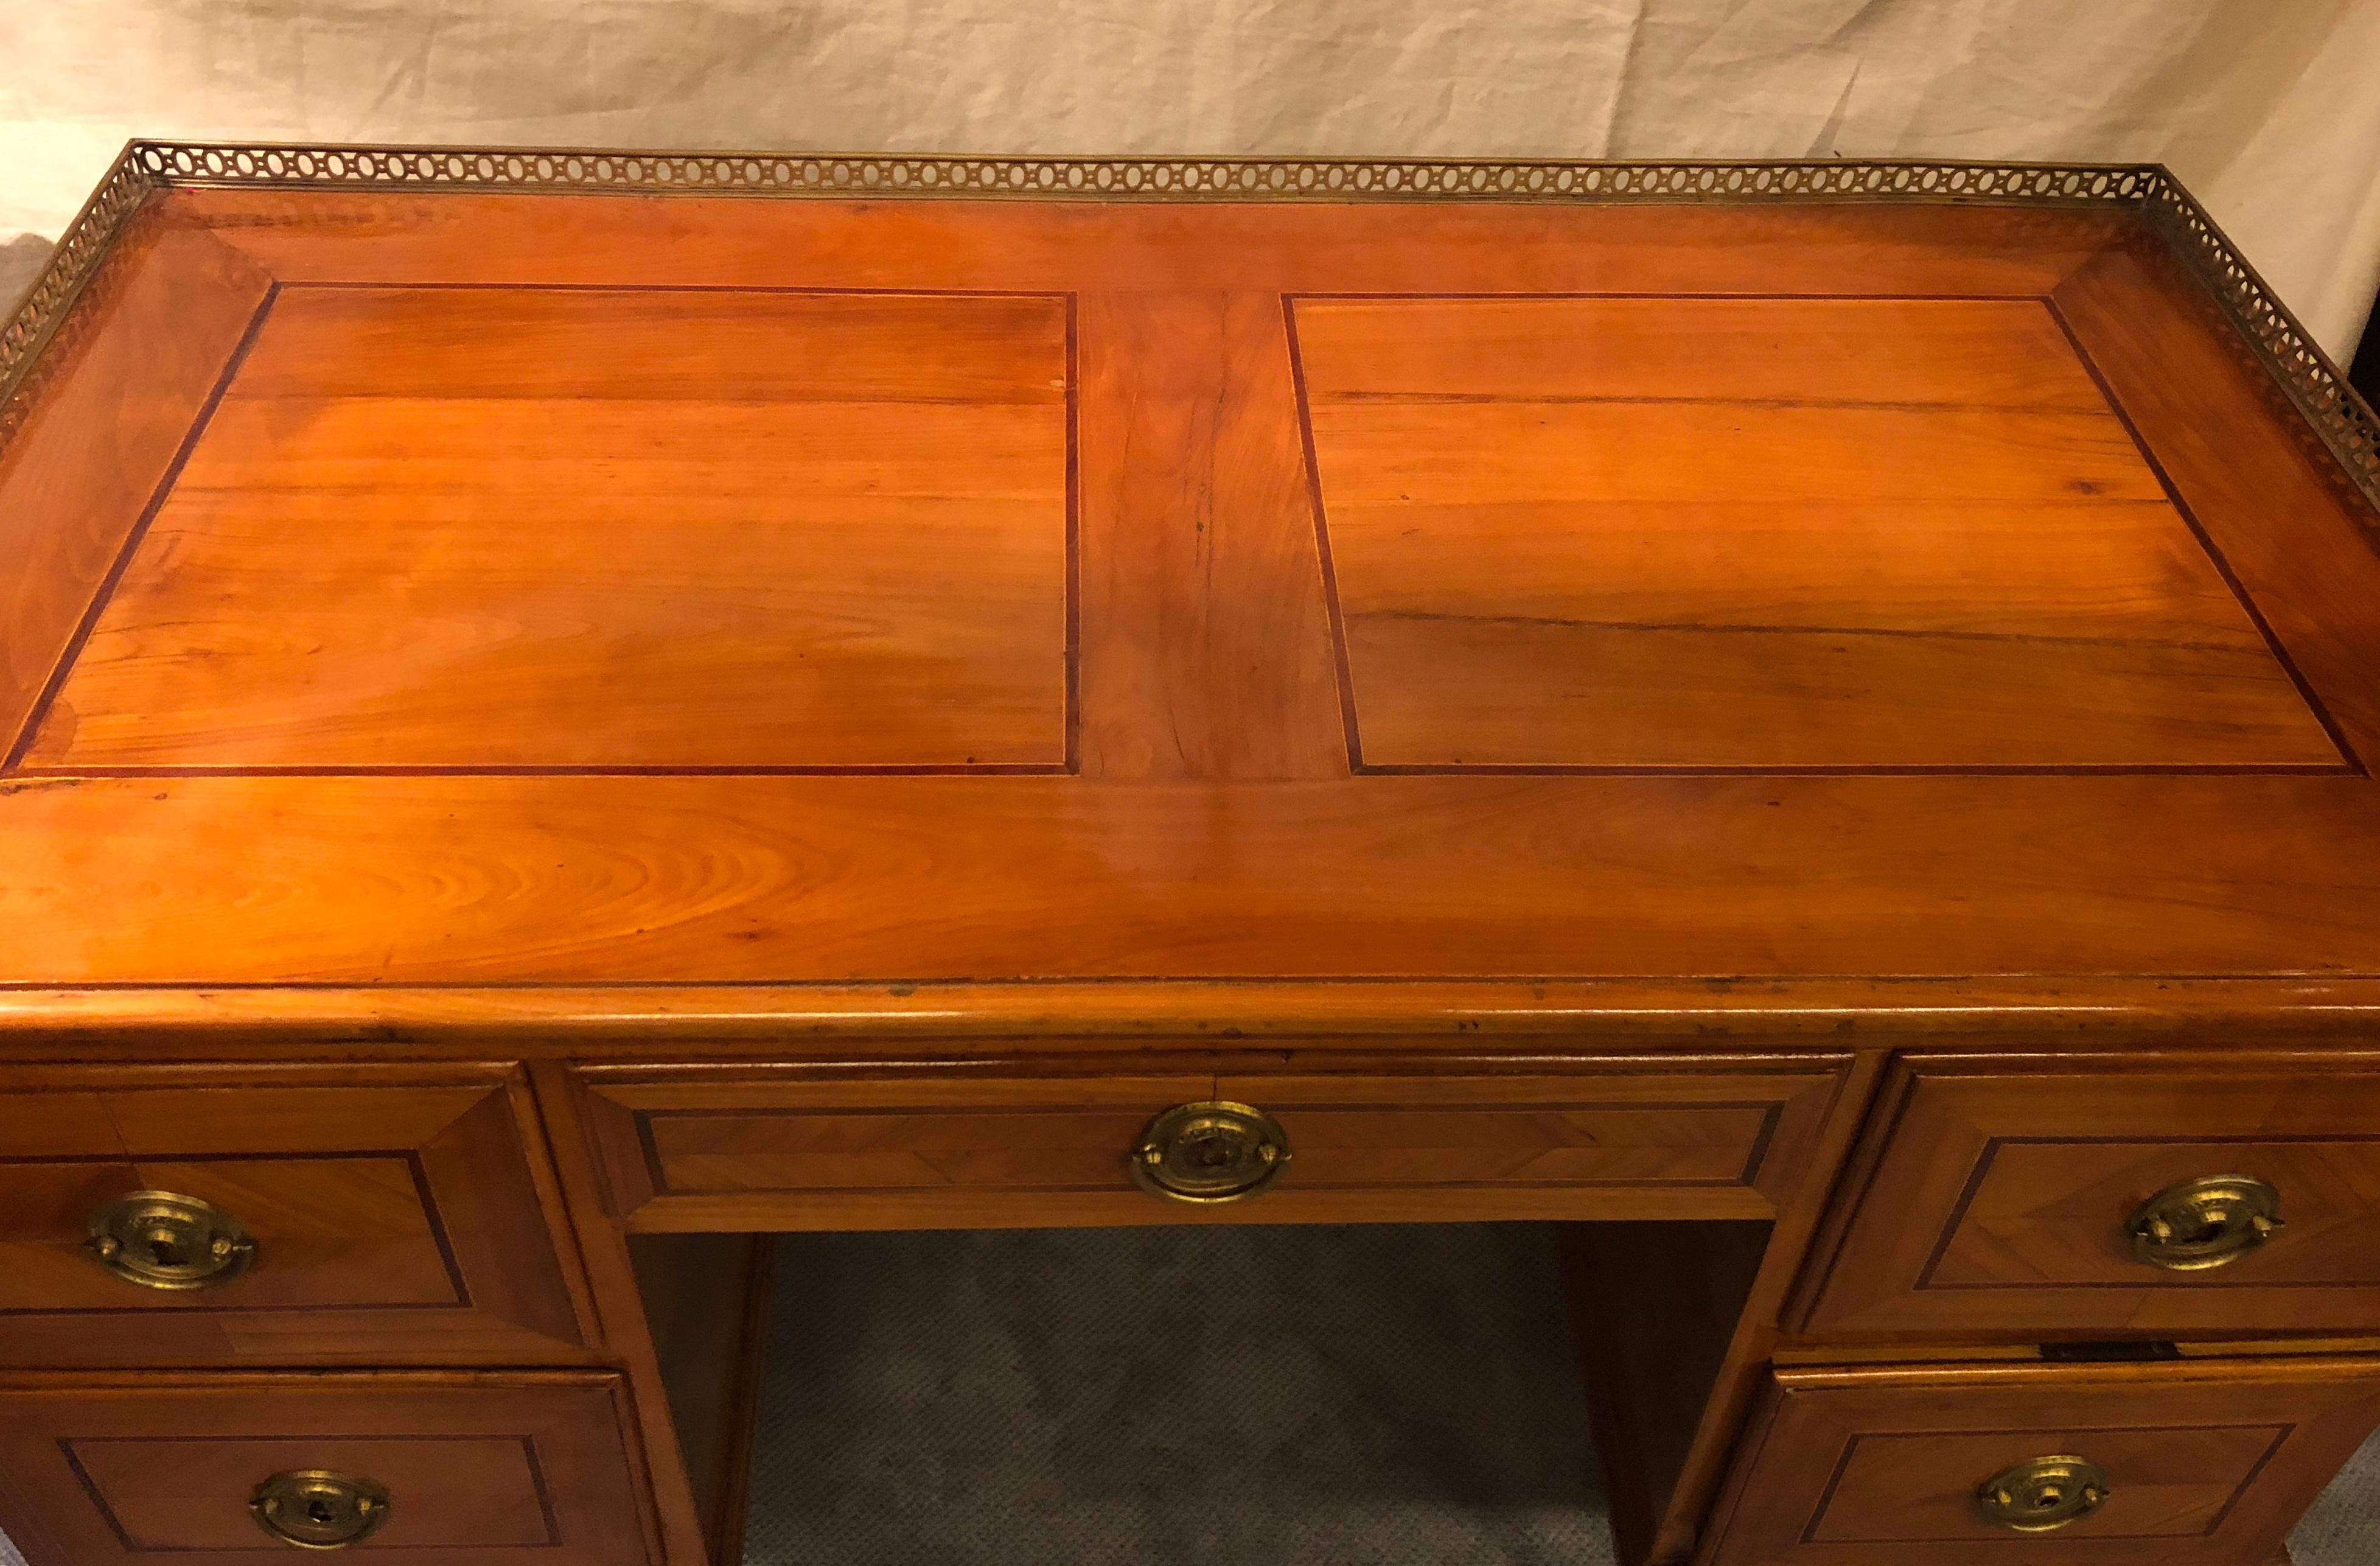 Rare Louis XVI writing desk, South German 1780, exquisite cherry and plum wood veneer on front back, sides and top. The writing top is framed by an open work brass bordering. In very good, refinished condition. The desk will be shipped from Germany.